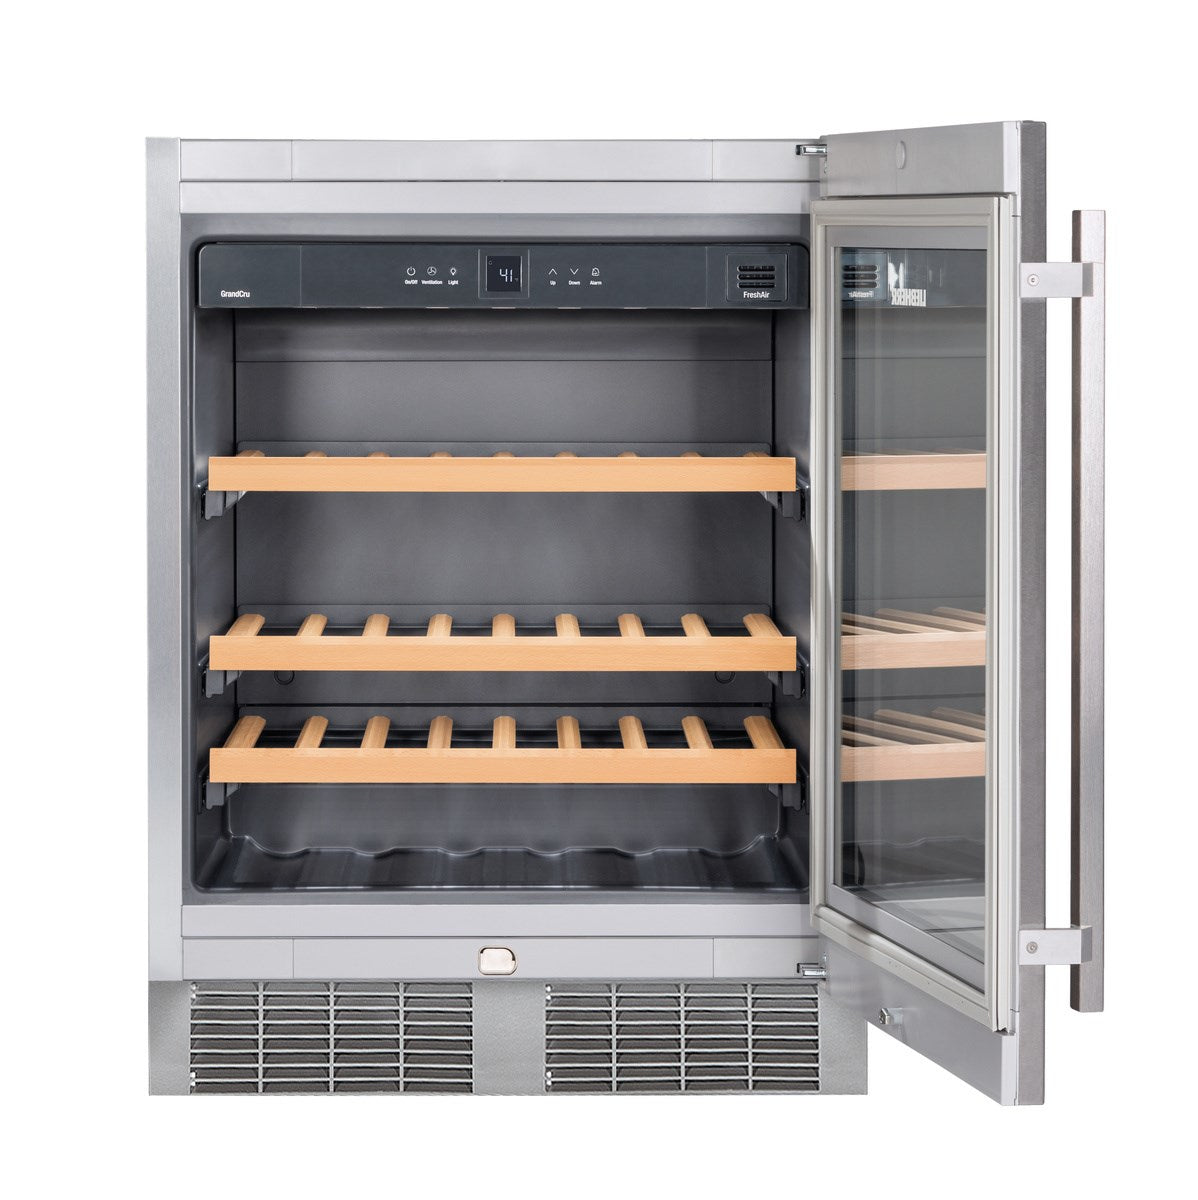 Liebherr - 23.5625 Inch 3.9 cu. ft Built In / Integrated Wine Fridge Refrigerator in Stainless - WU4500